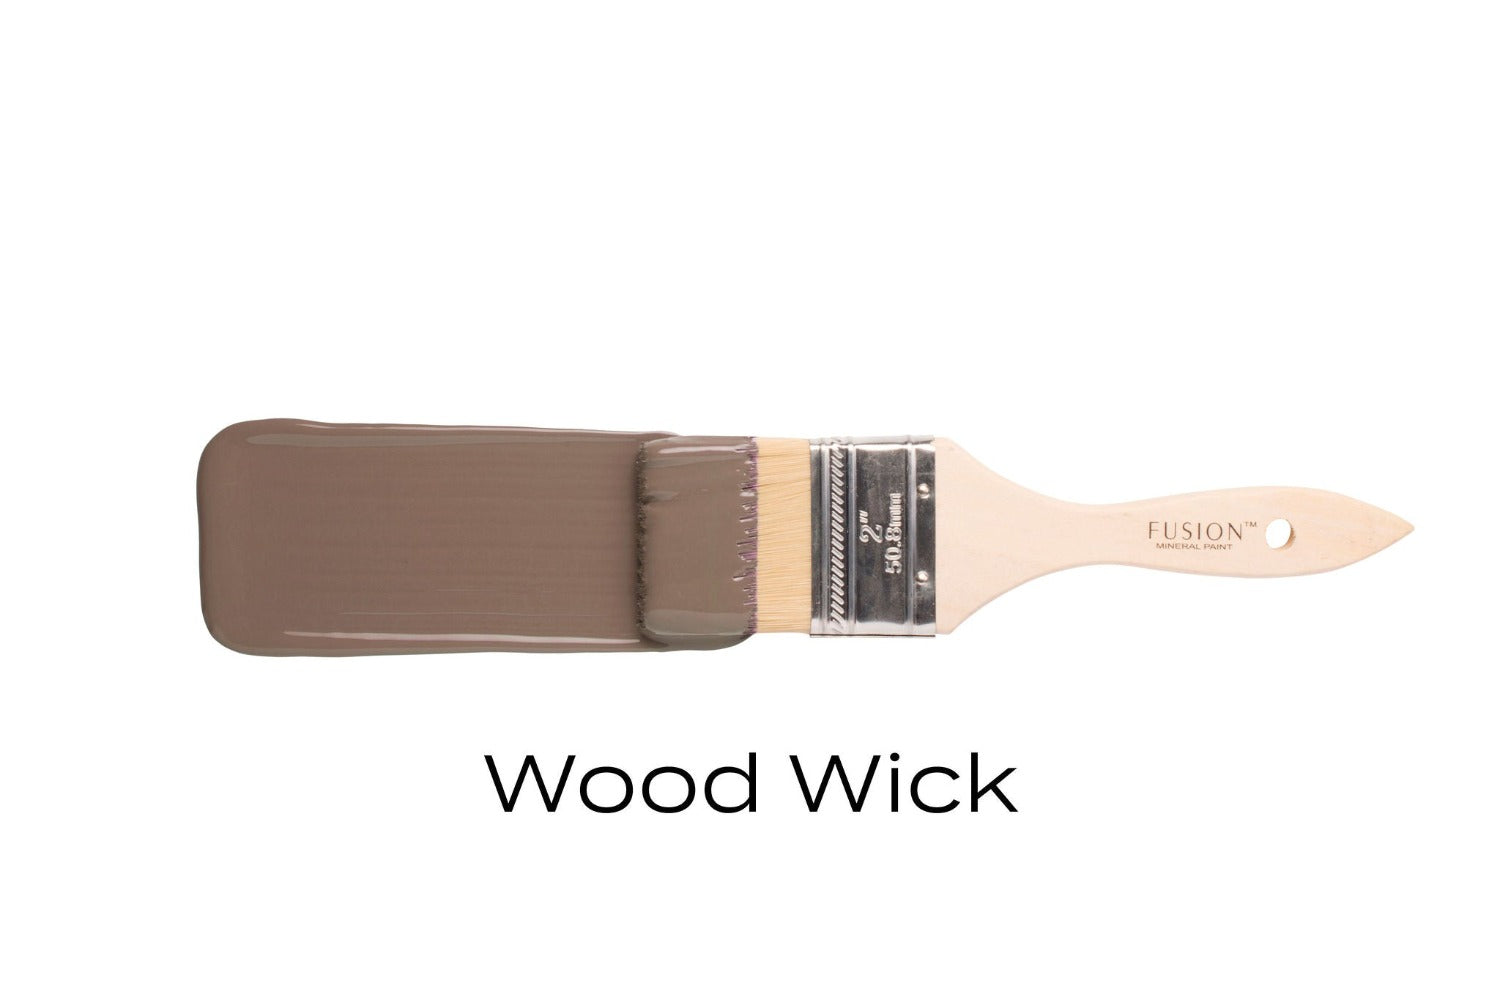 WOOD WICK - Fusion Mineral Paint - 37ml, 500ml